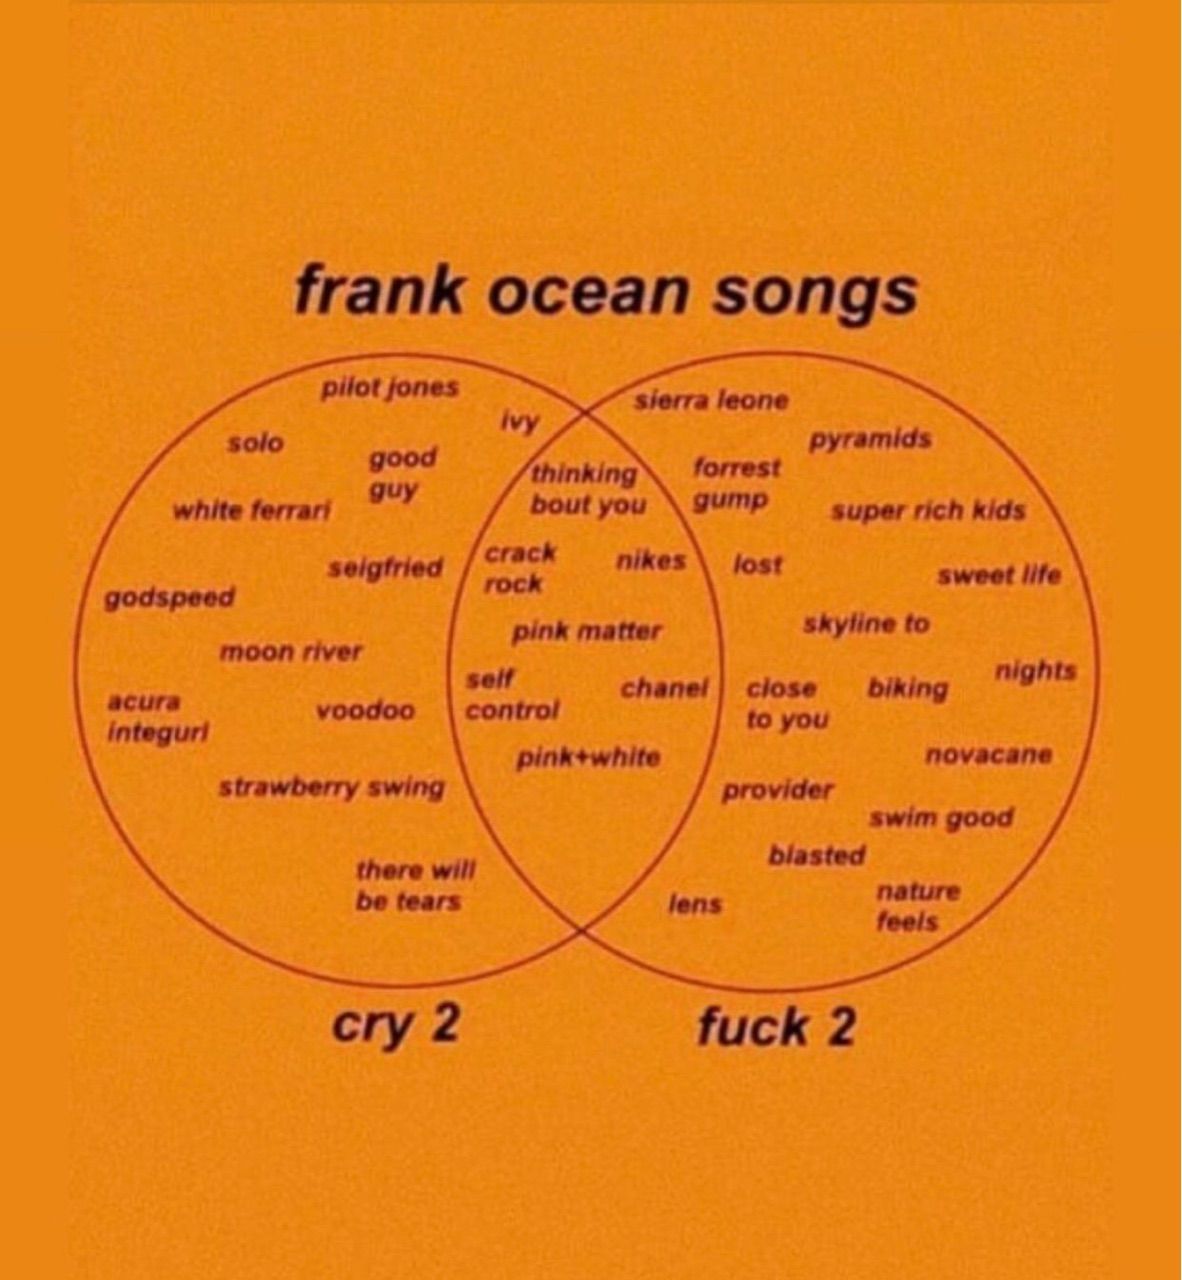 image about GOD OCEAN. See more about frank